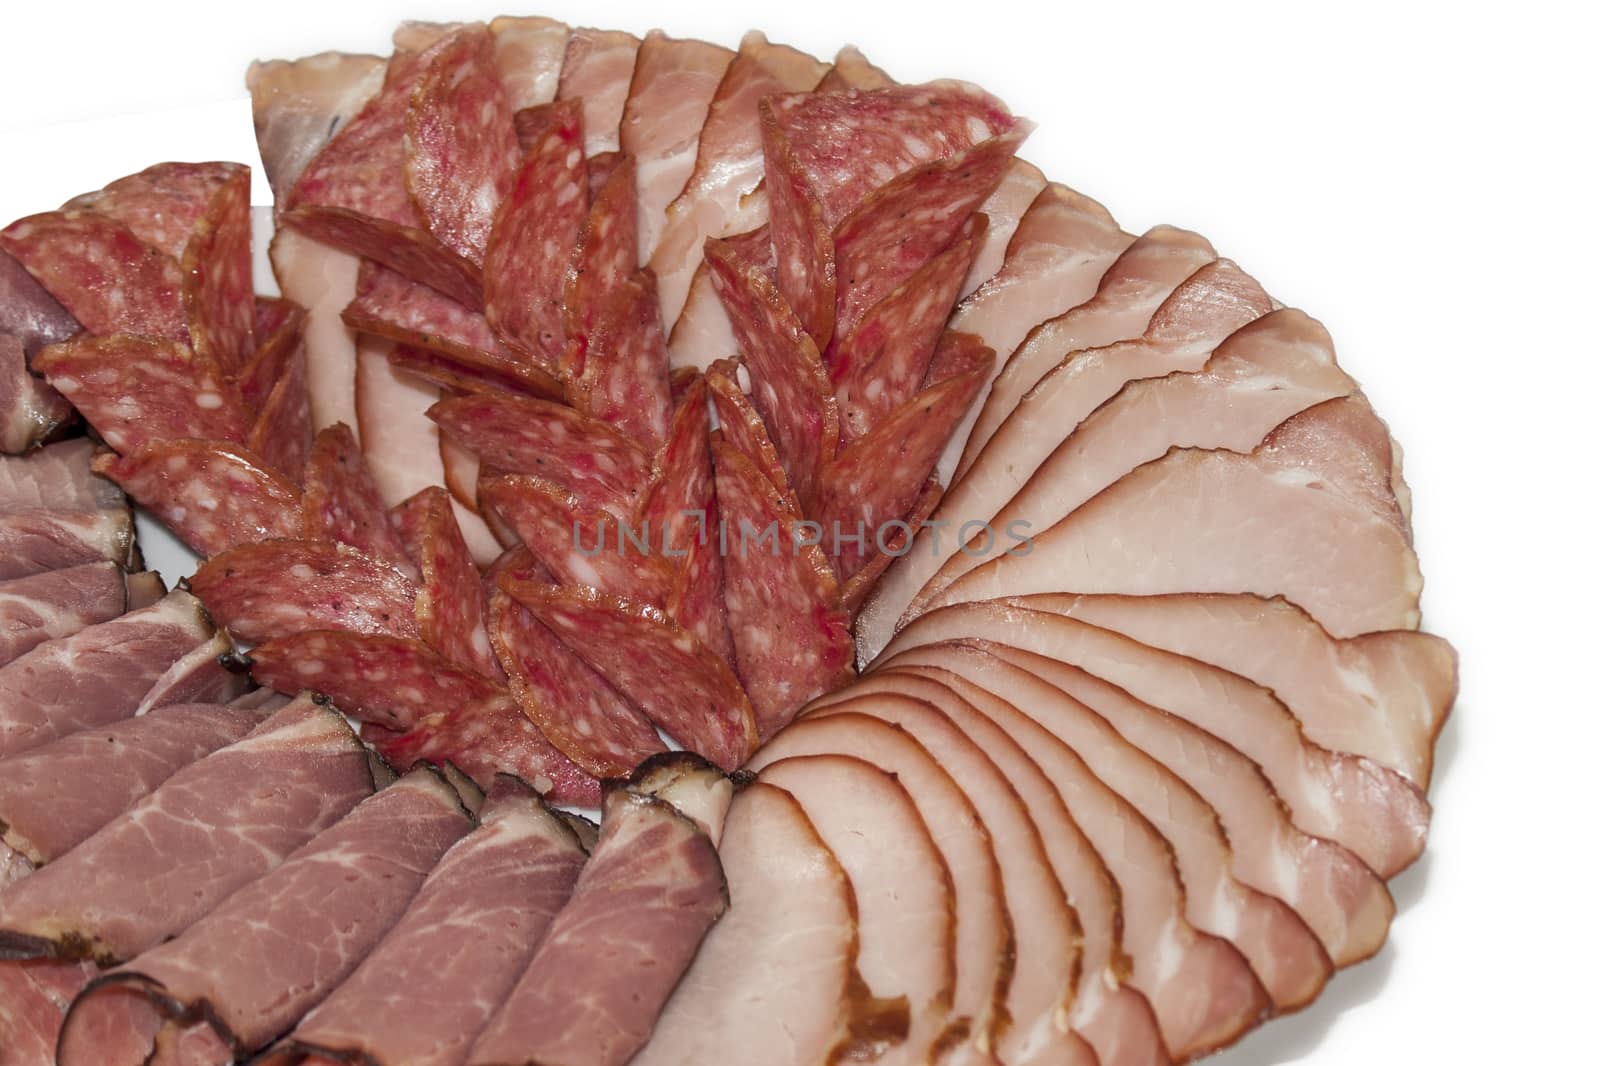 Cutted smoked sirloin, smoked ham and sausage on a plate by zlajaphoto